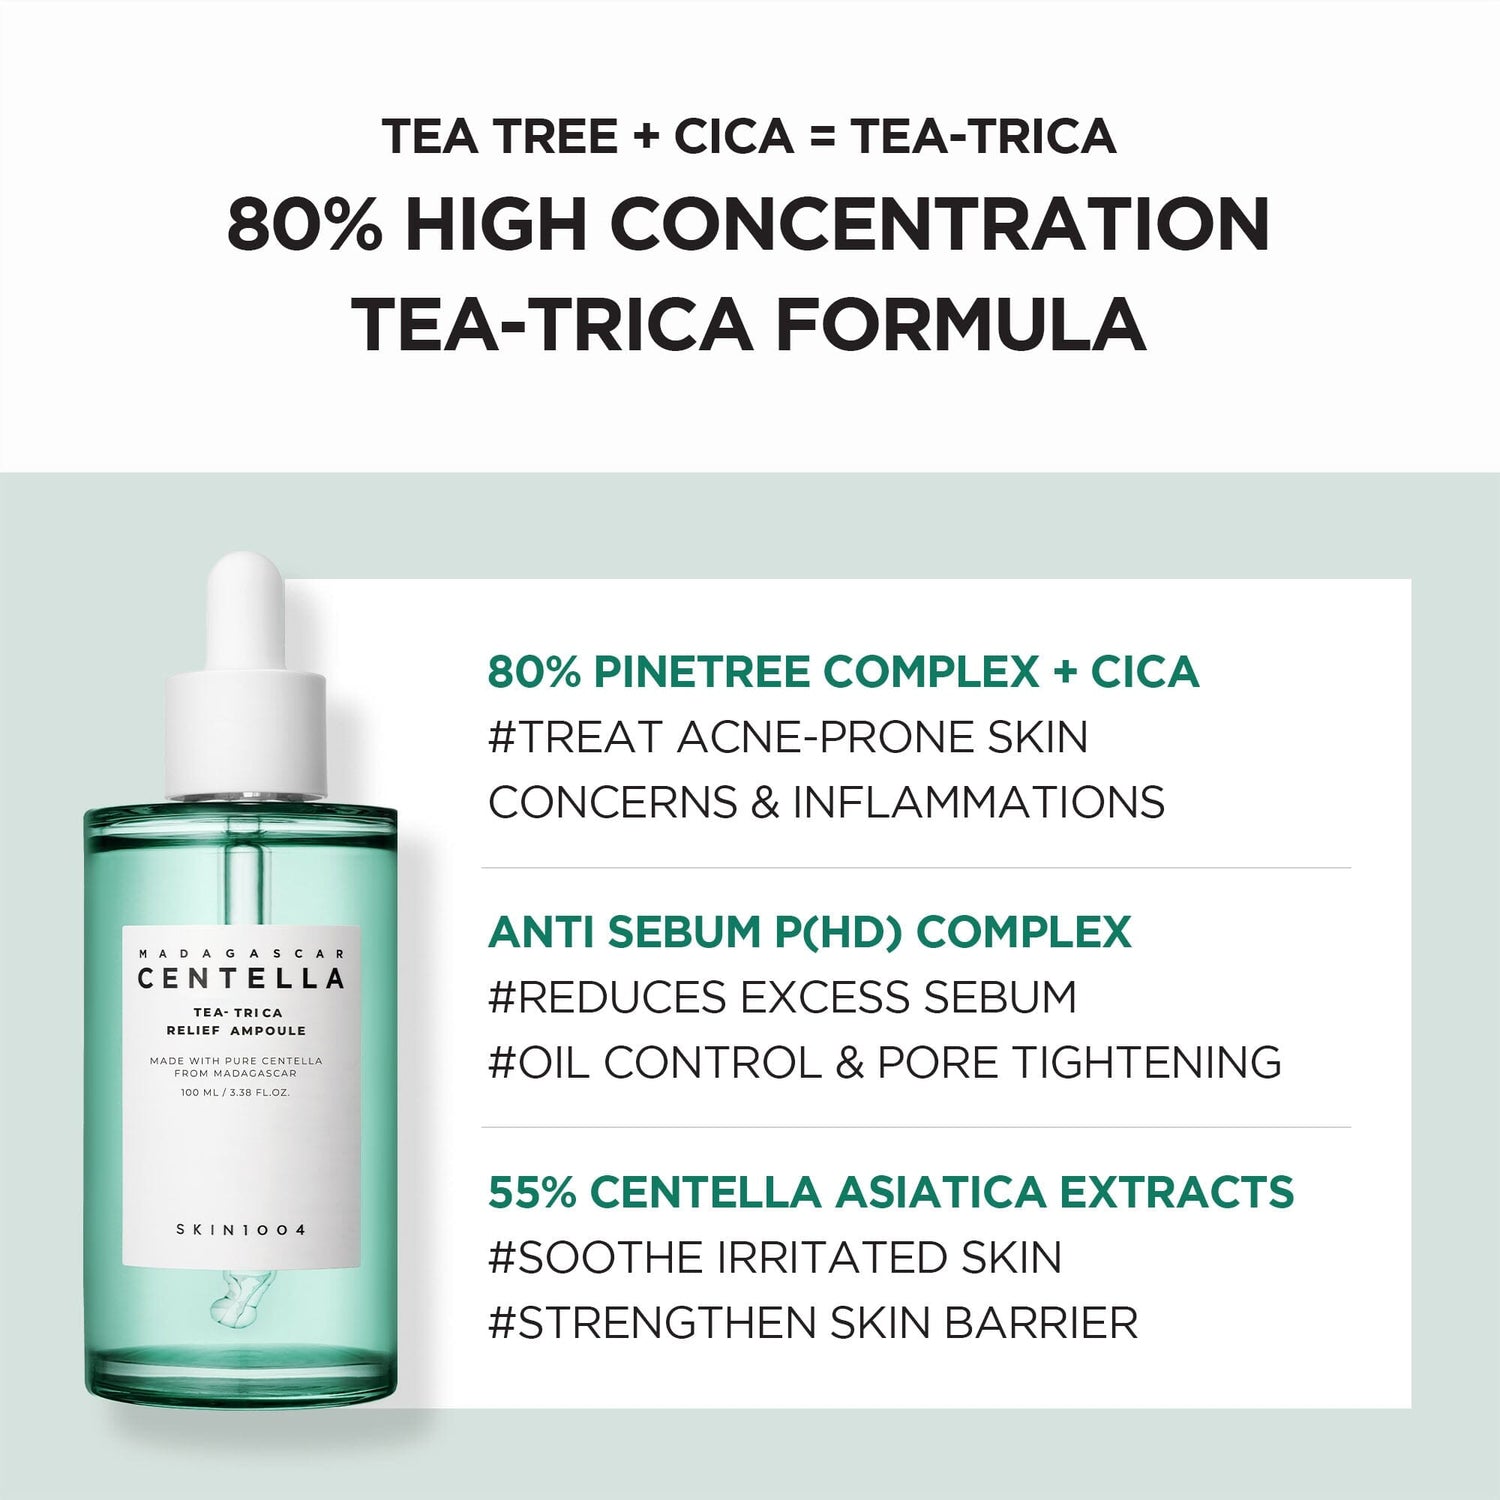 SKIN1004 Madagascar Centella Tea-Trica Relief Ampoule ( Pouch Sample ), at Orion Beauty. SKIN1004 Official Sole Authorized Retailer in Sri Lanka!